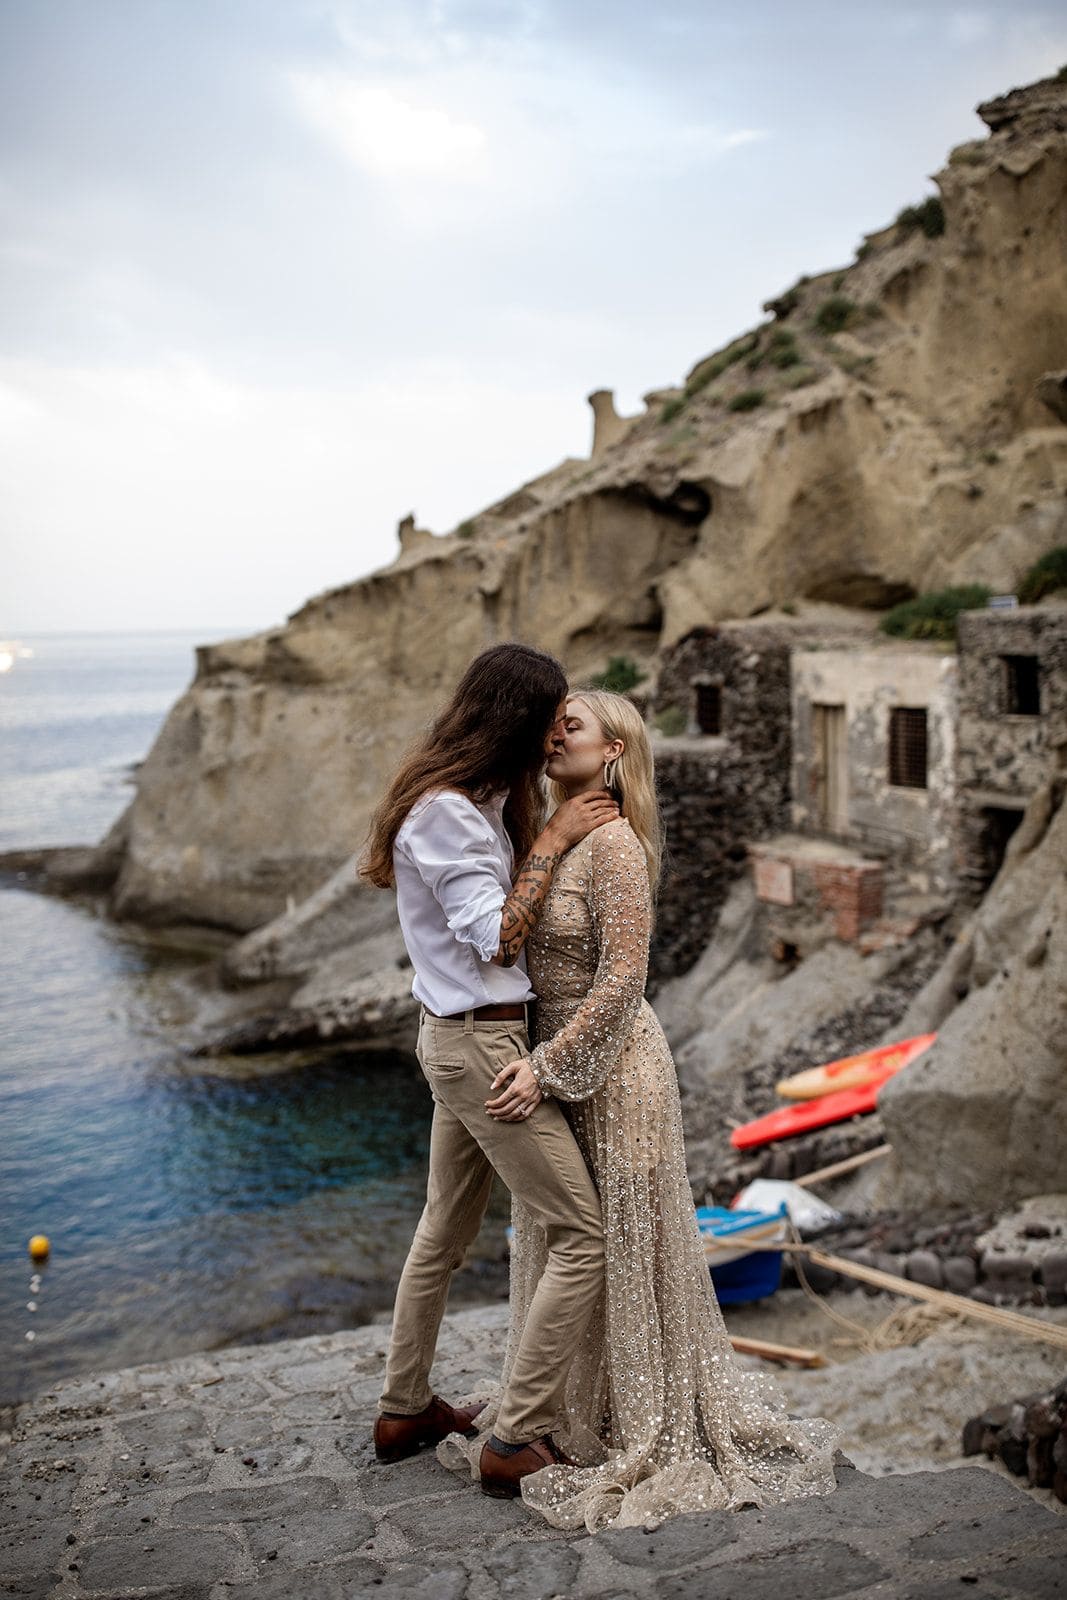 Man and woman kiss in Isole Eolie, Sicily, Italy